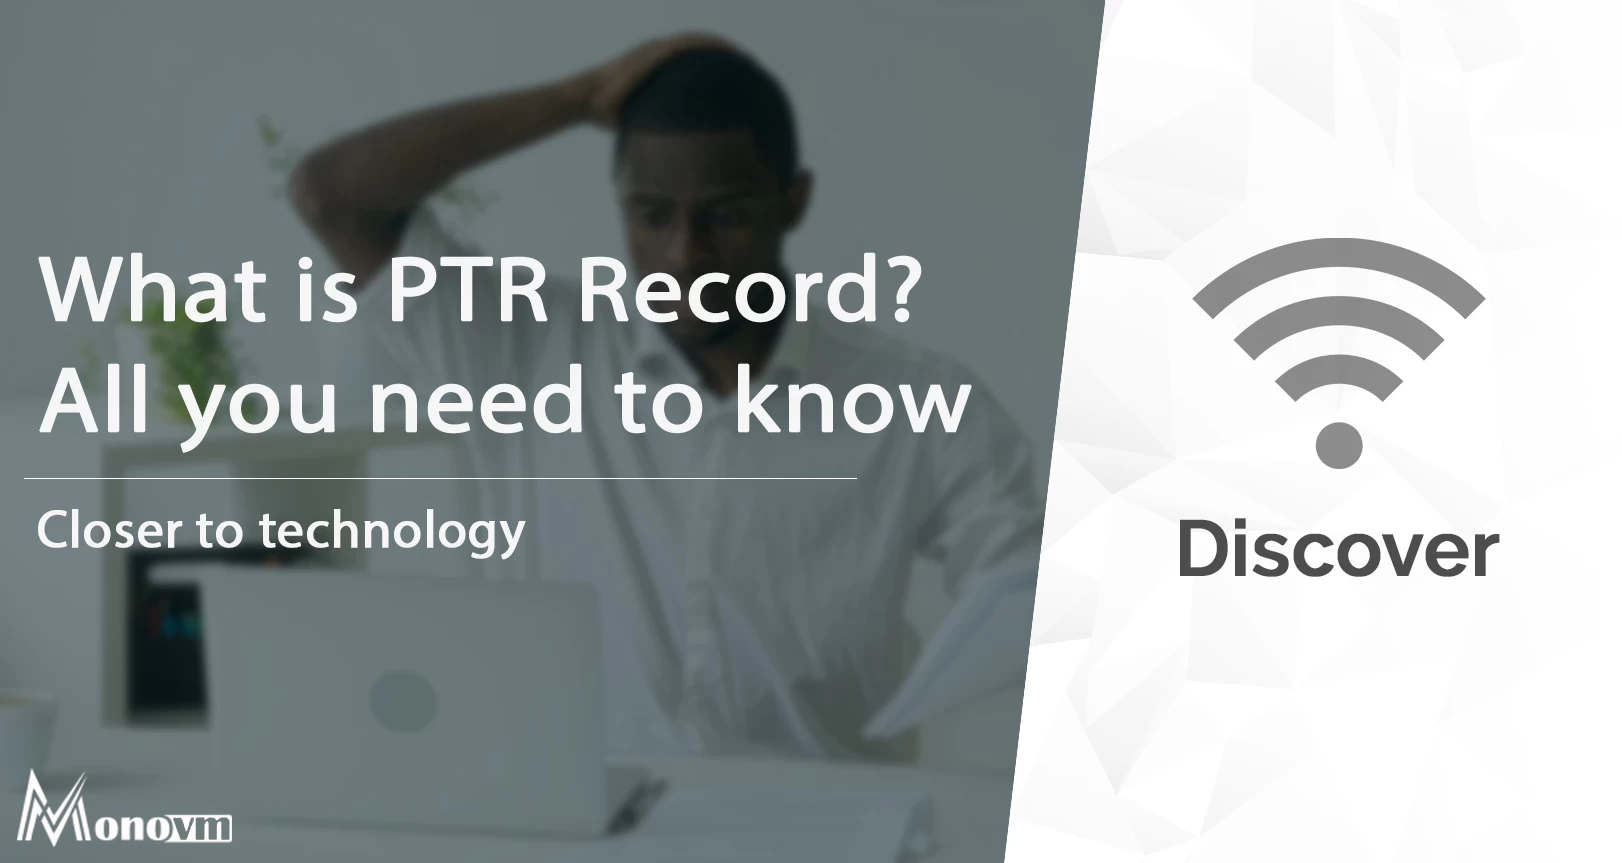 What is PTR Record?